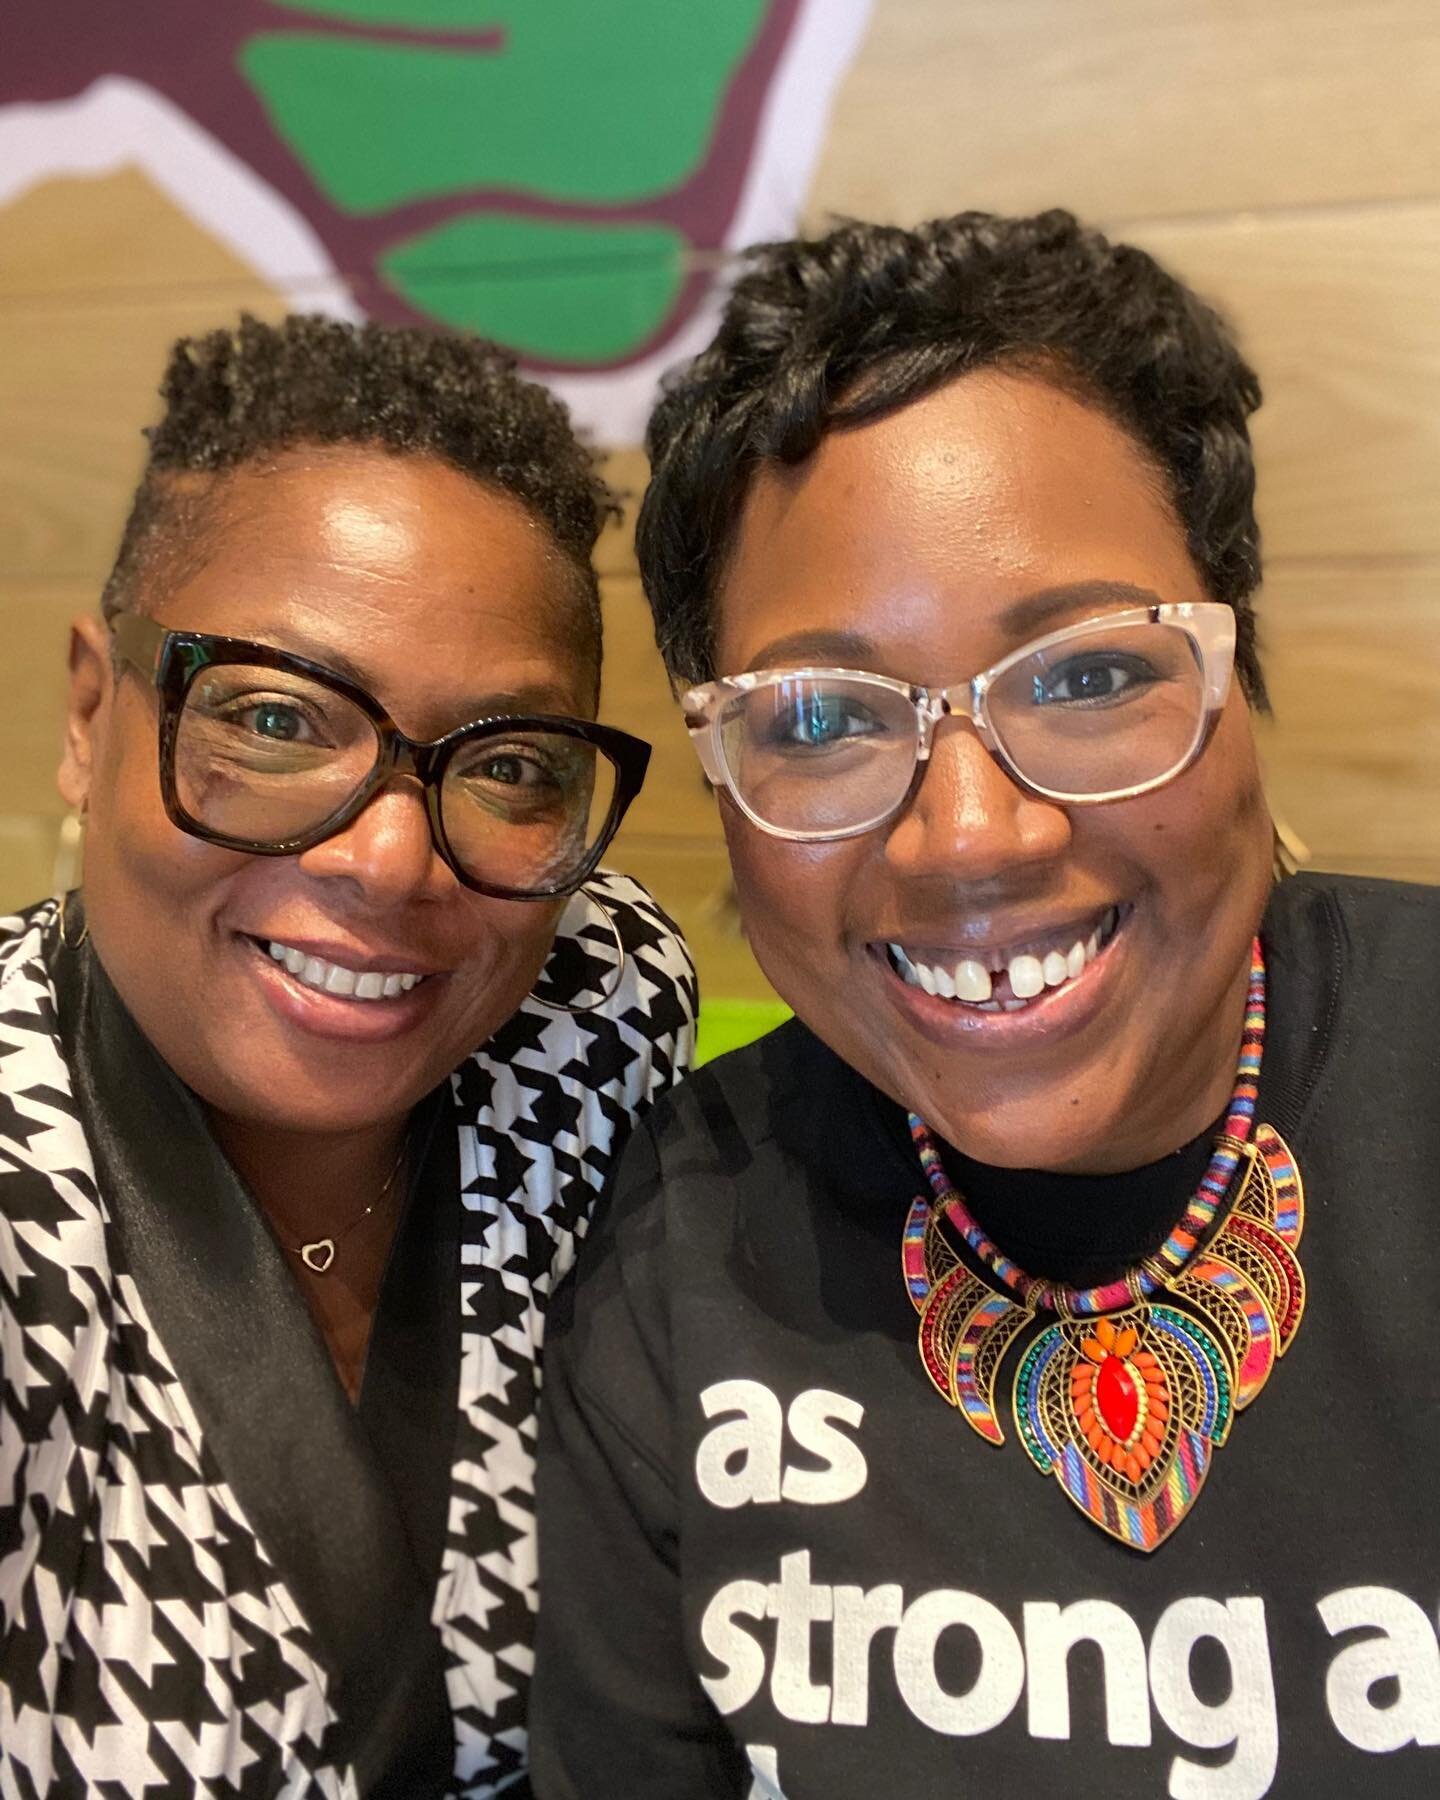 Sisterhood. What a gift, especially to have sisters in ministry. What a blessing to spend time with my friend and sister, Rev. Ivory Bryant. I&rsquo;m so glad we live closer to each other now. #reverenddonnao